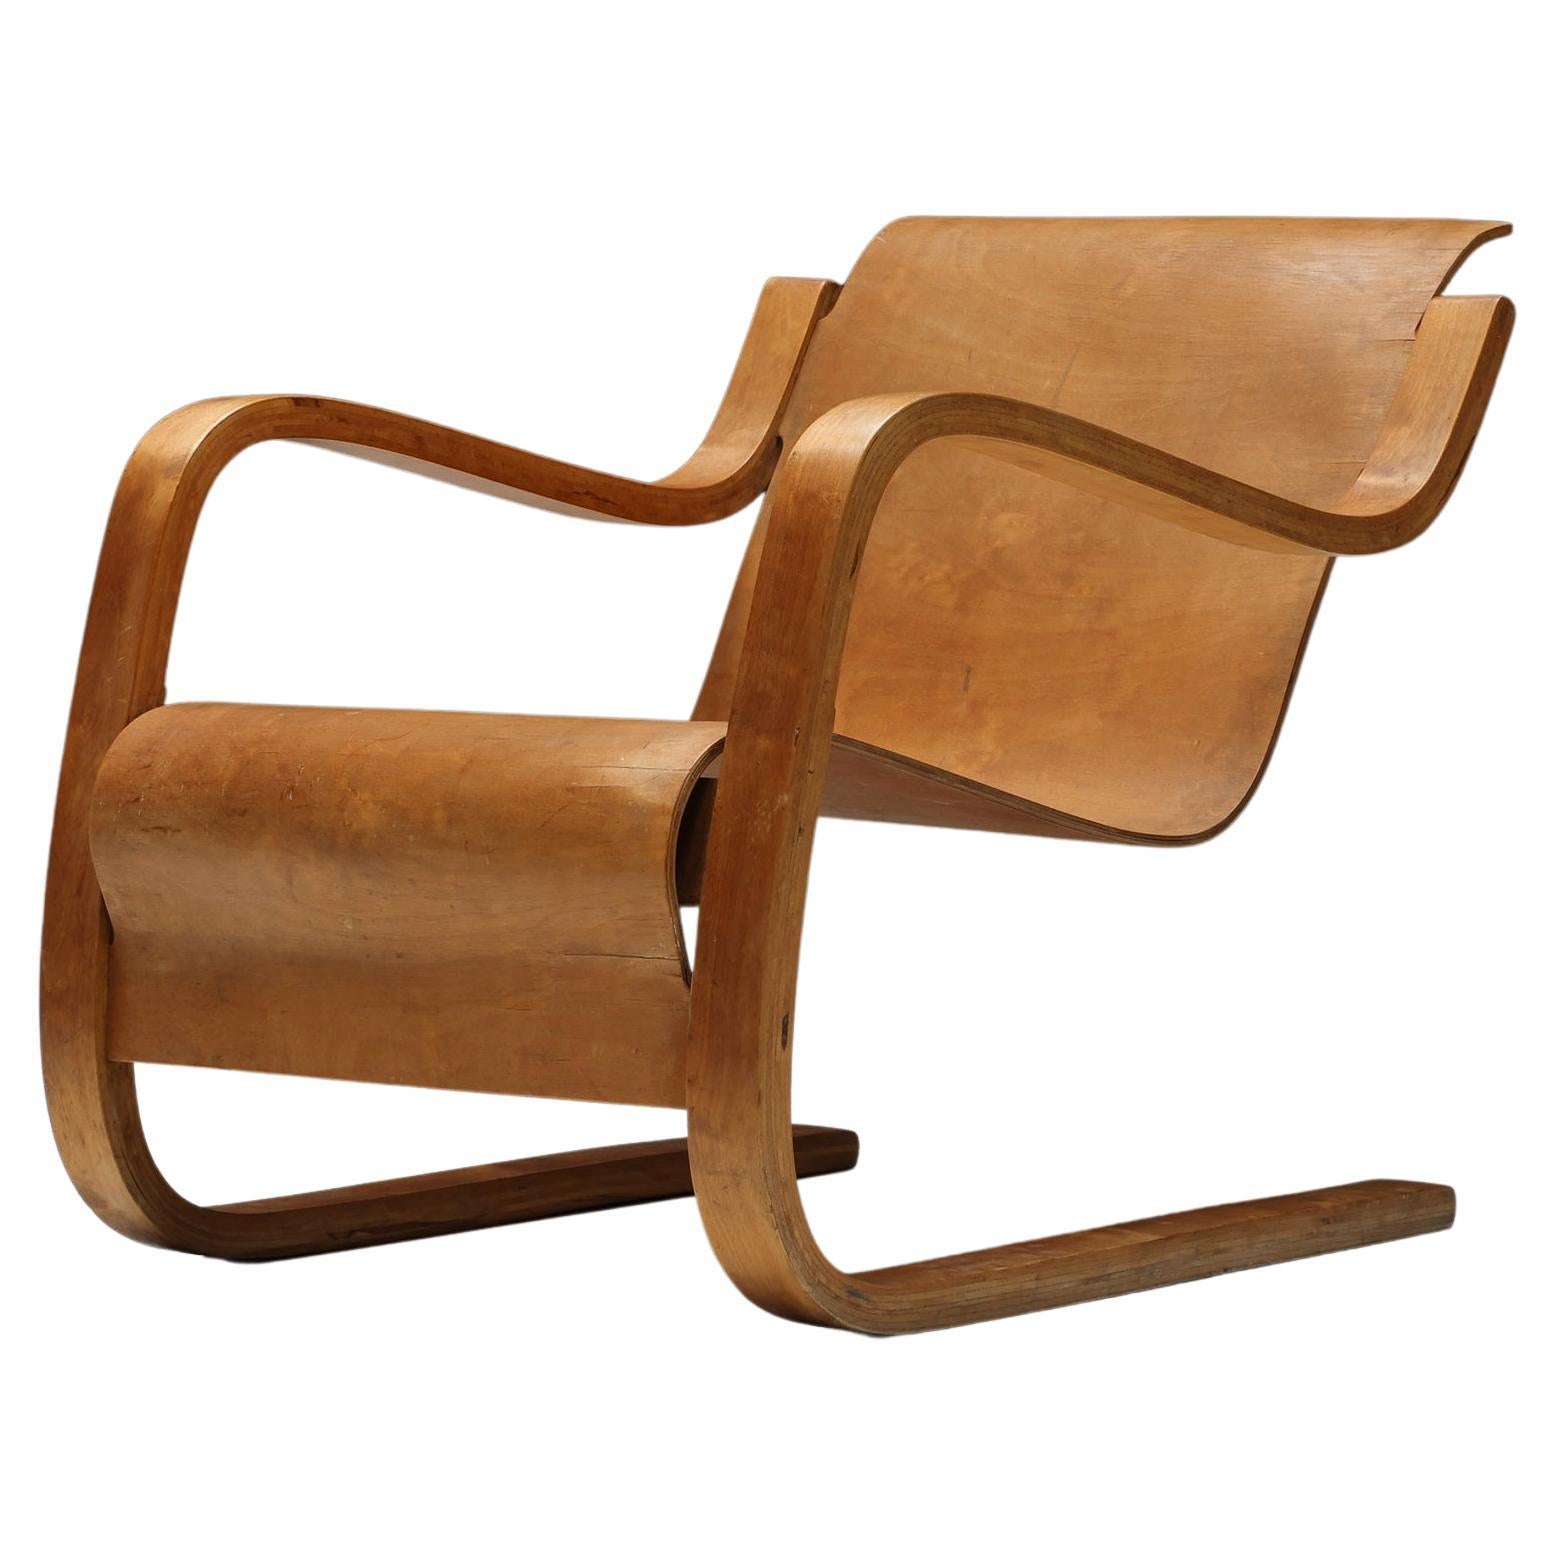 Cantilever Lounge Chair Nr. 31 by Alvar Aalto, Finland, 1930s